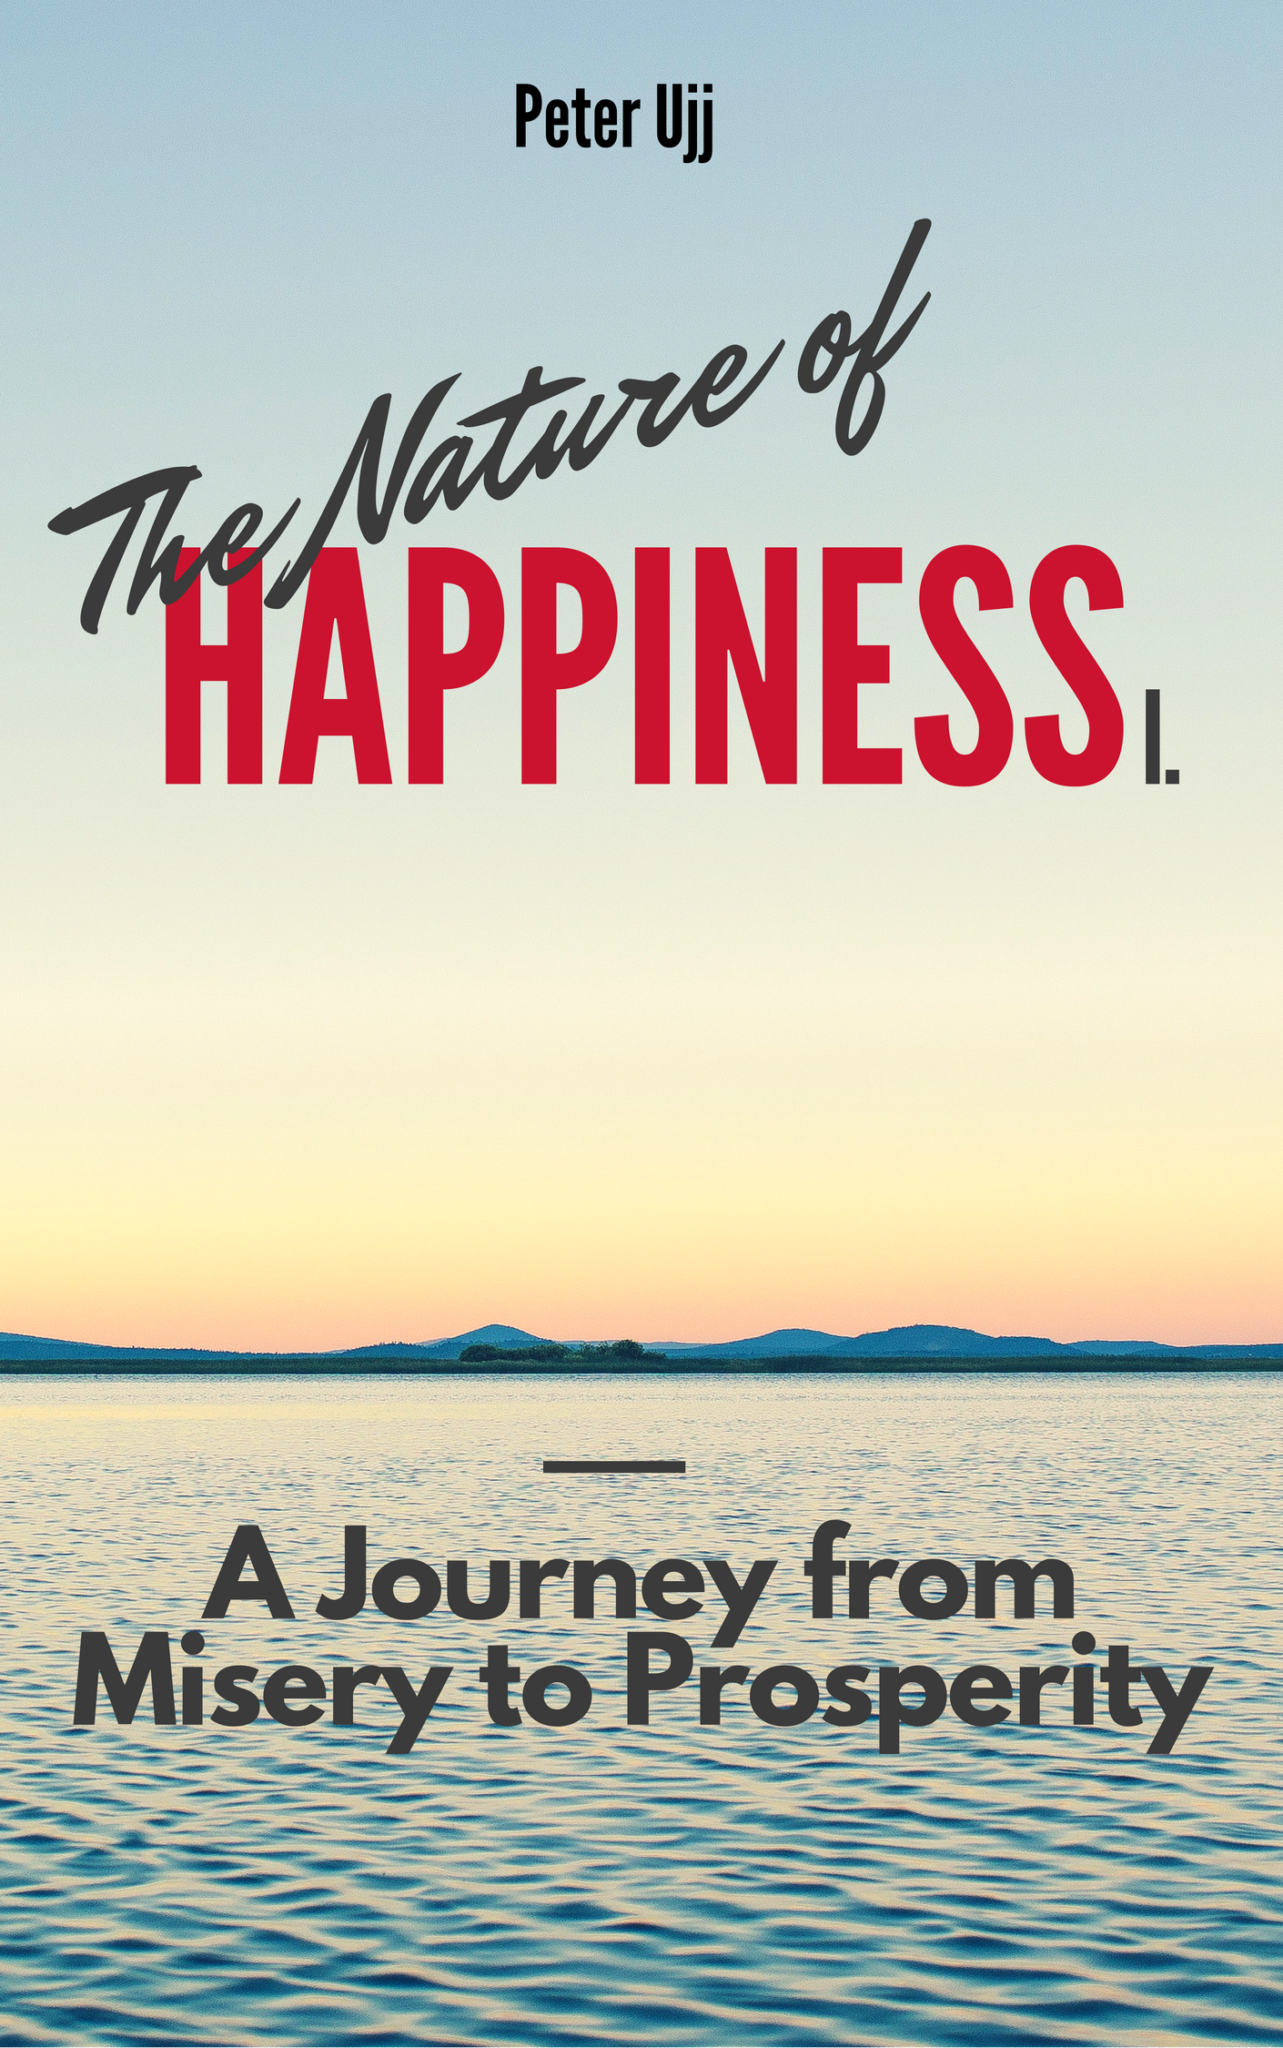 FREE: The Nature of Happiness – A Journey from Misery to Prosperity by Peter Ujj